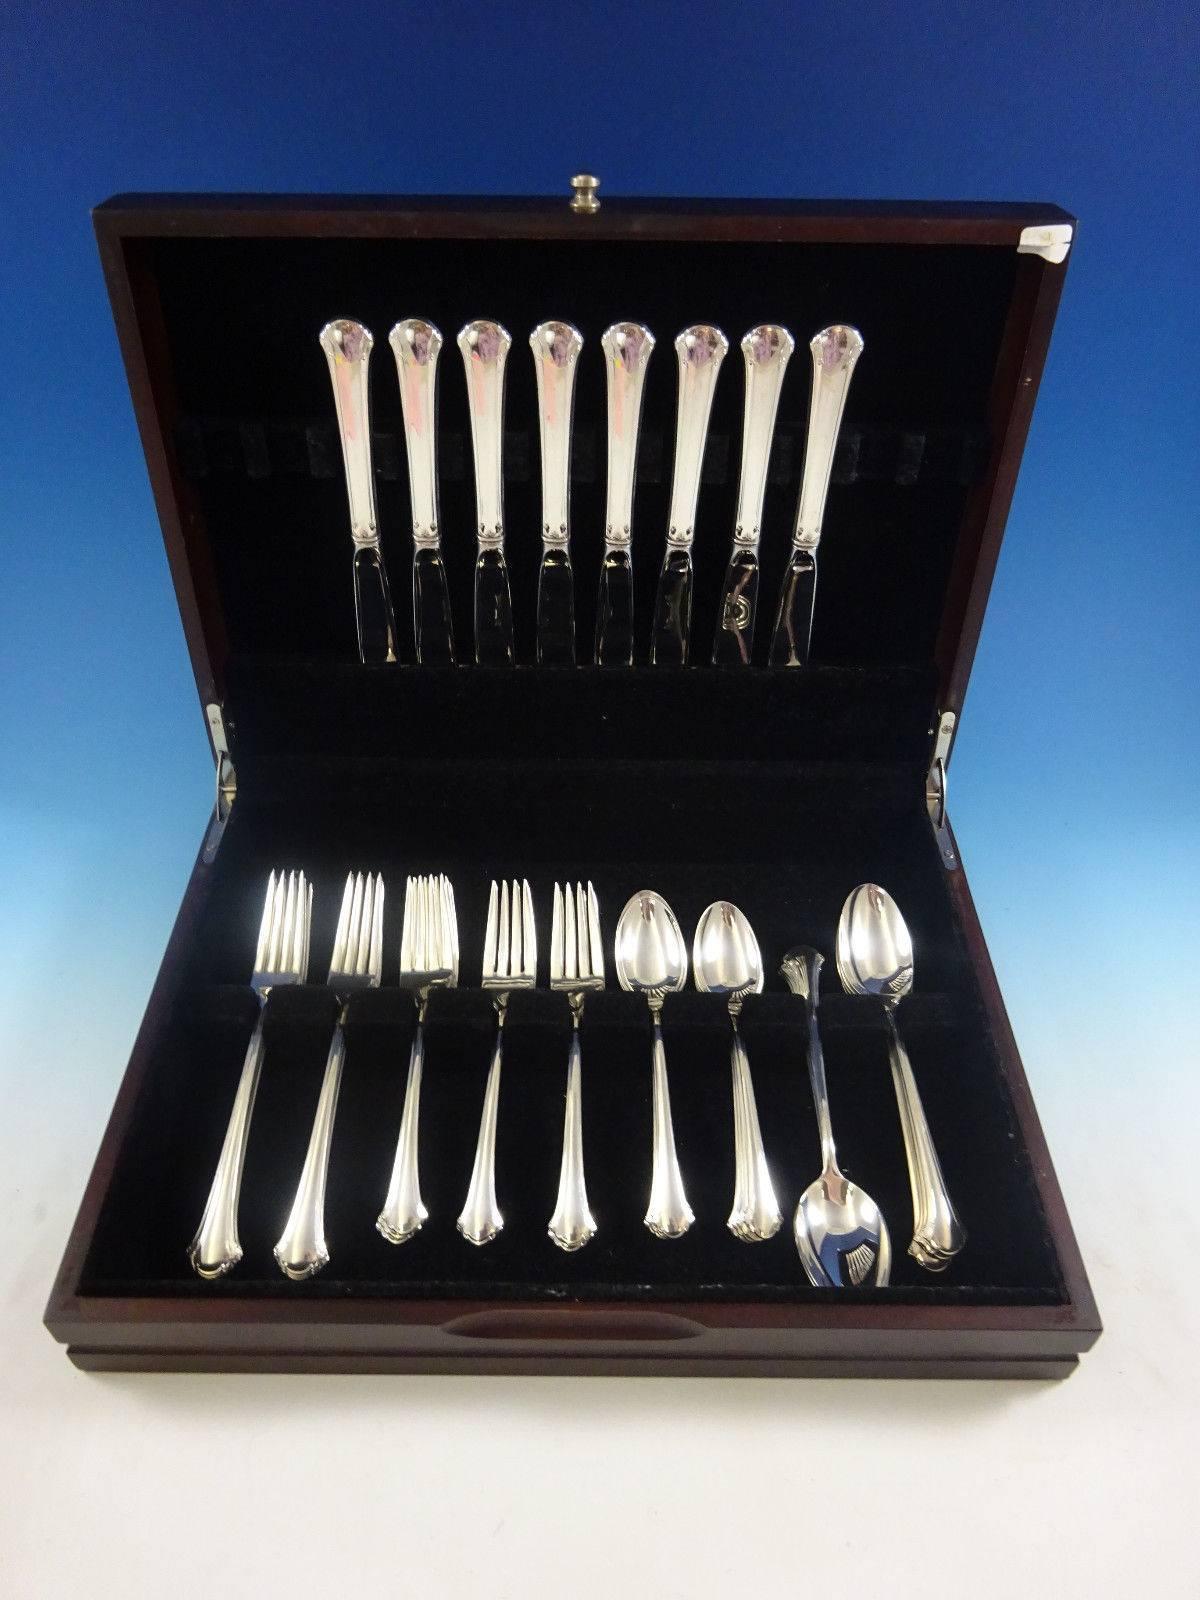 Chippendale by Towle Sterling Silver flatware set - 40 pieces. This set includes: 

8 Knives, 8 3/4